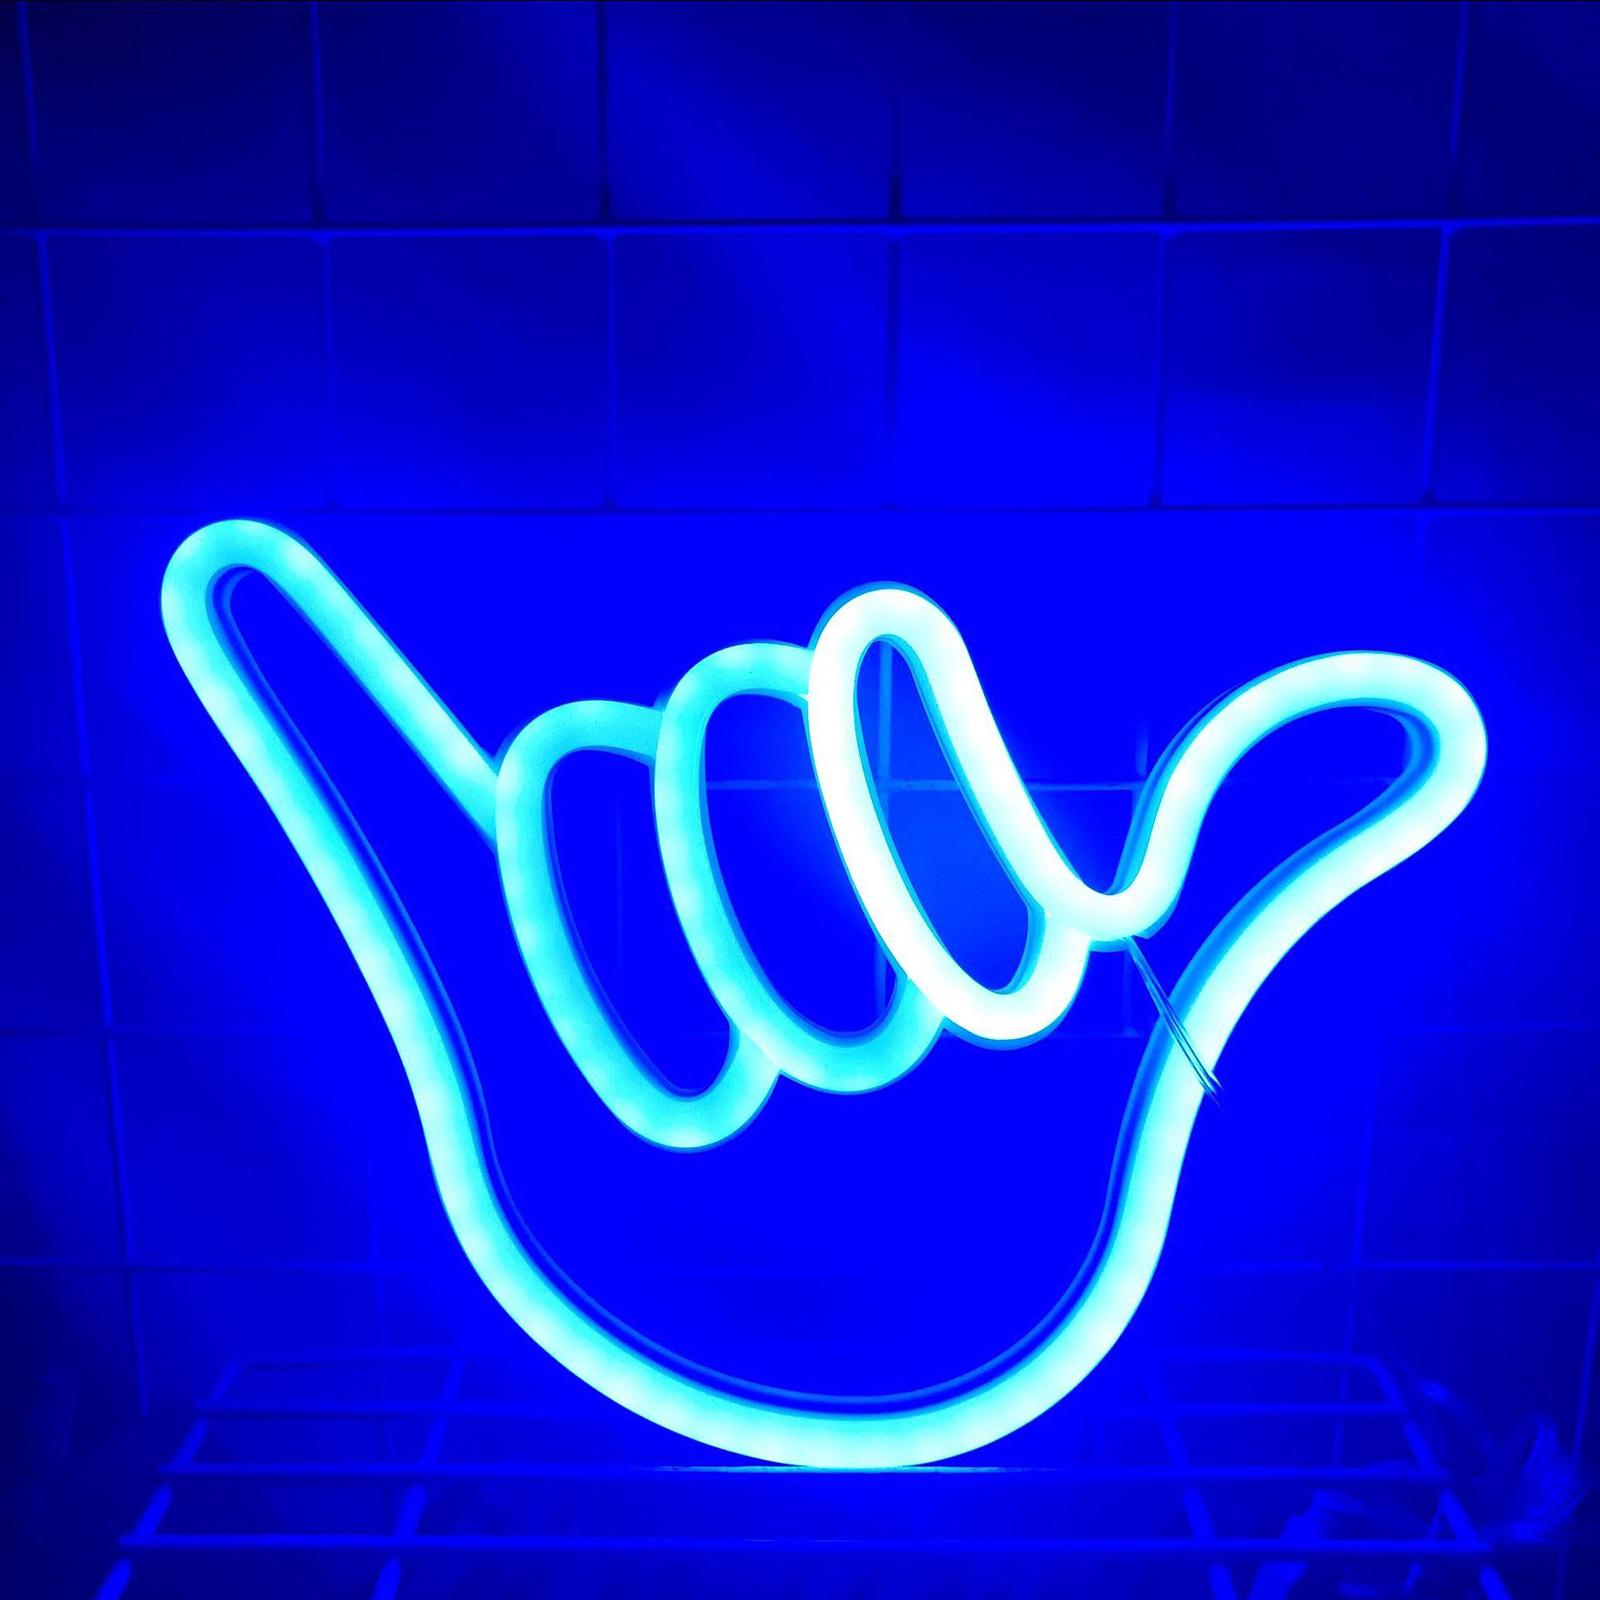 USB Peace Gesture LED Neon Light Hand Light up Battery/USB Operated Art Decorations Light for Wall Decor Xmas Bedroom Party Home